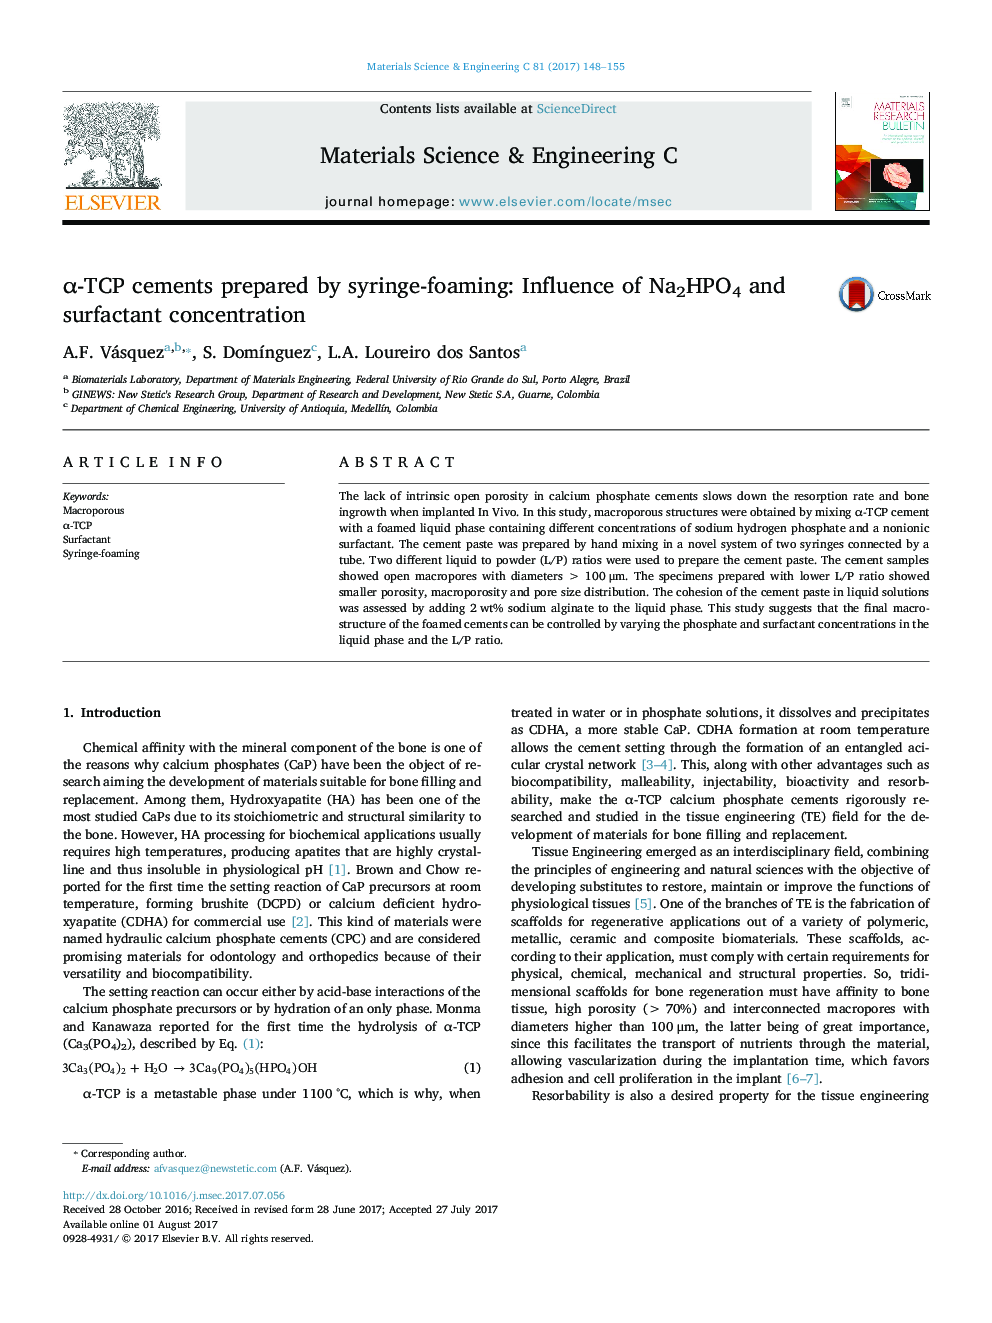 Î±-TCP cements prepared by syringe-foaming: Influence of Na2HPO4 and surfactant concentration